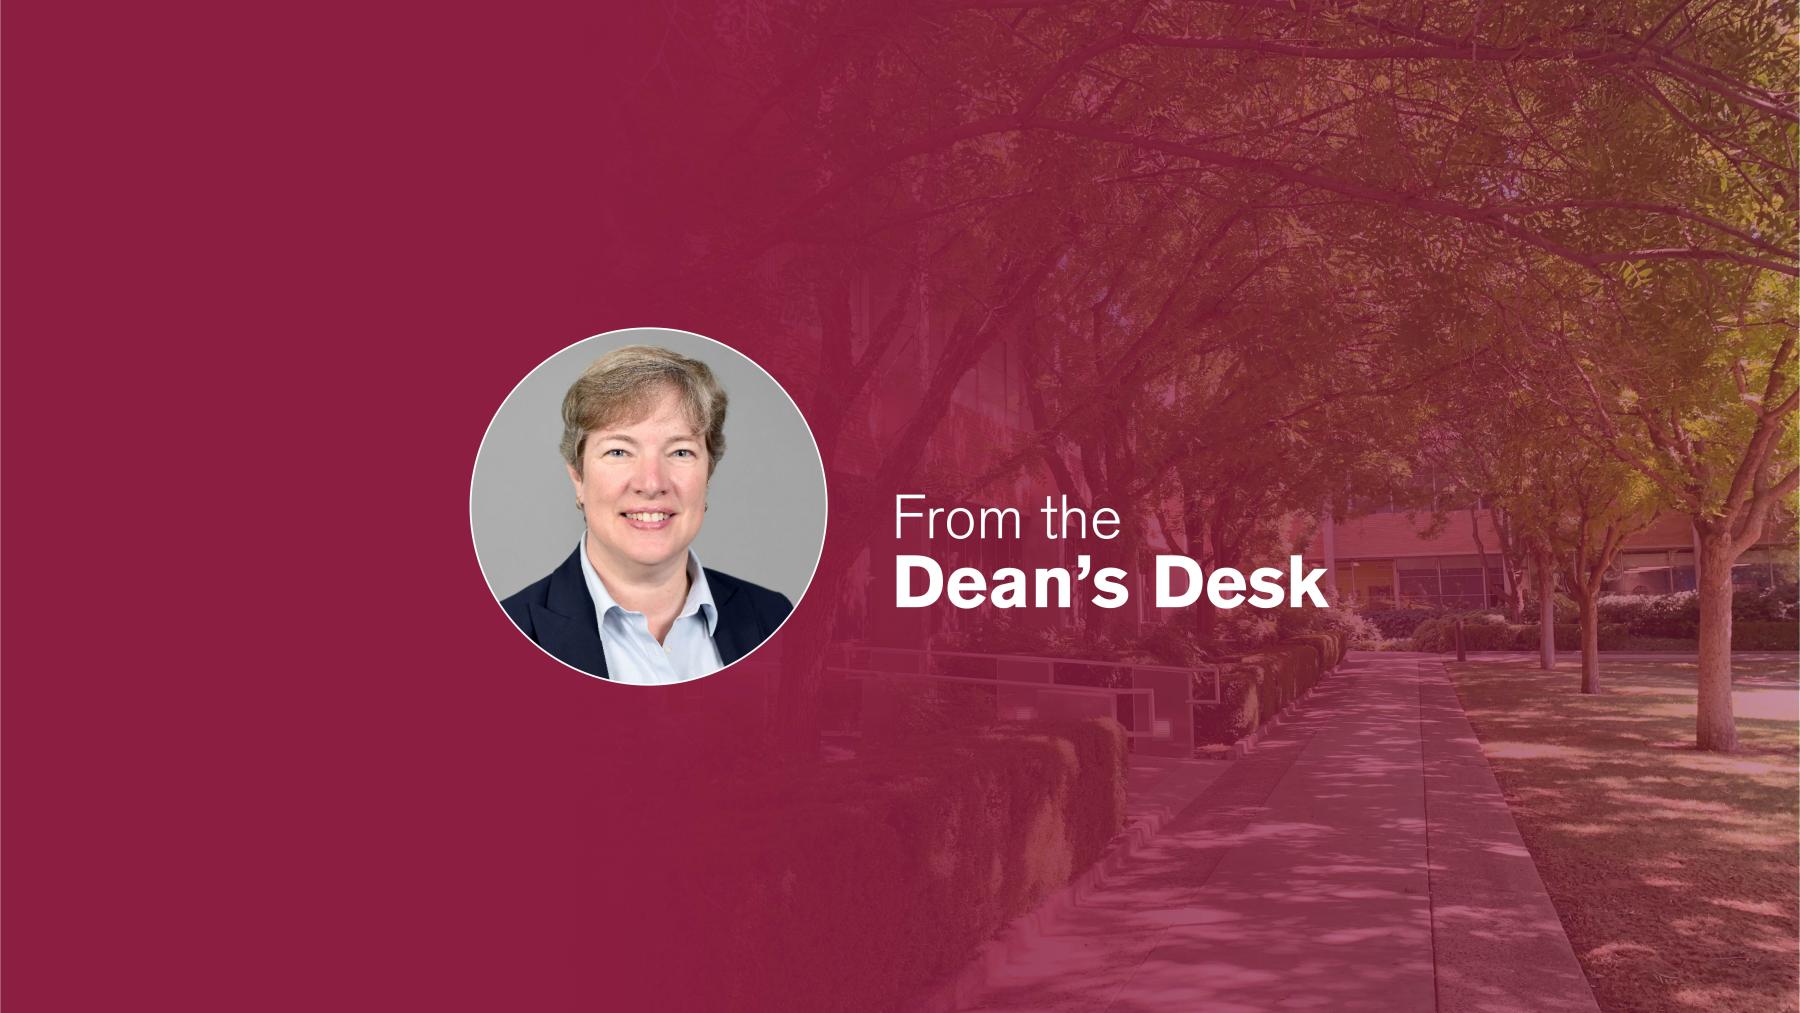 From the Dean's Desk